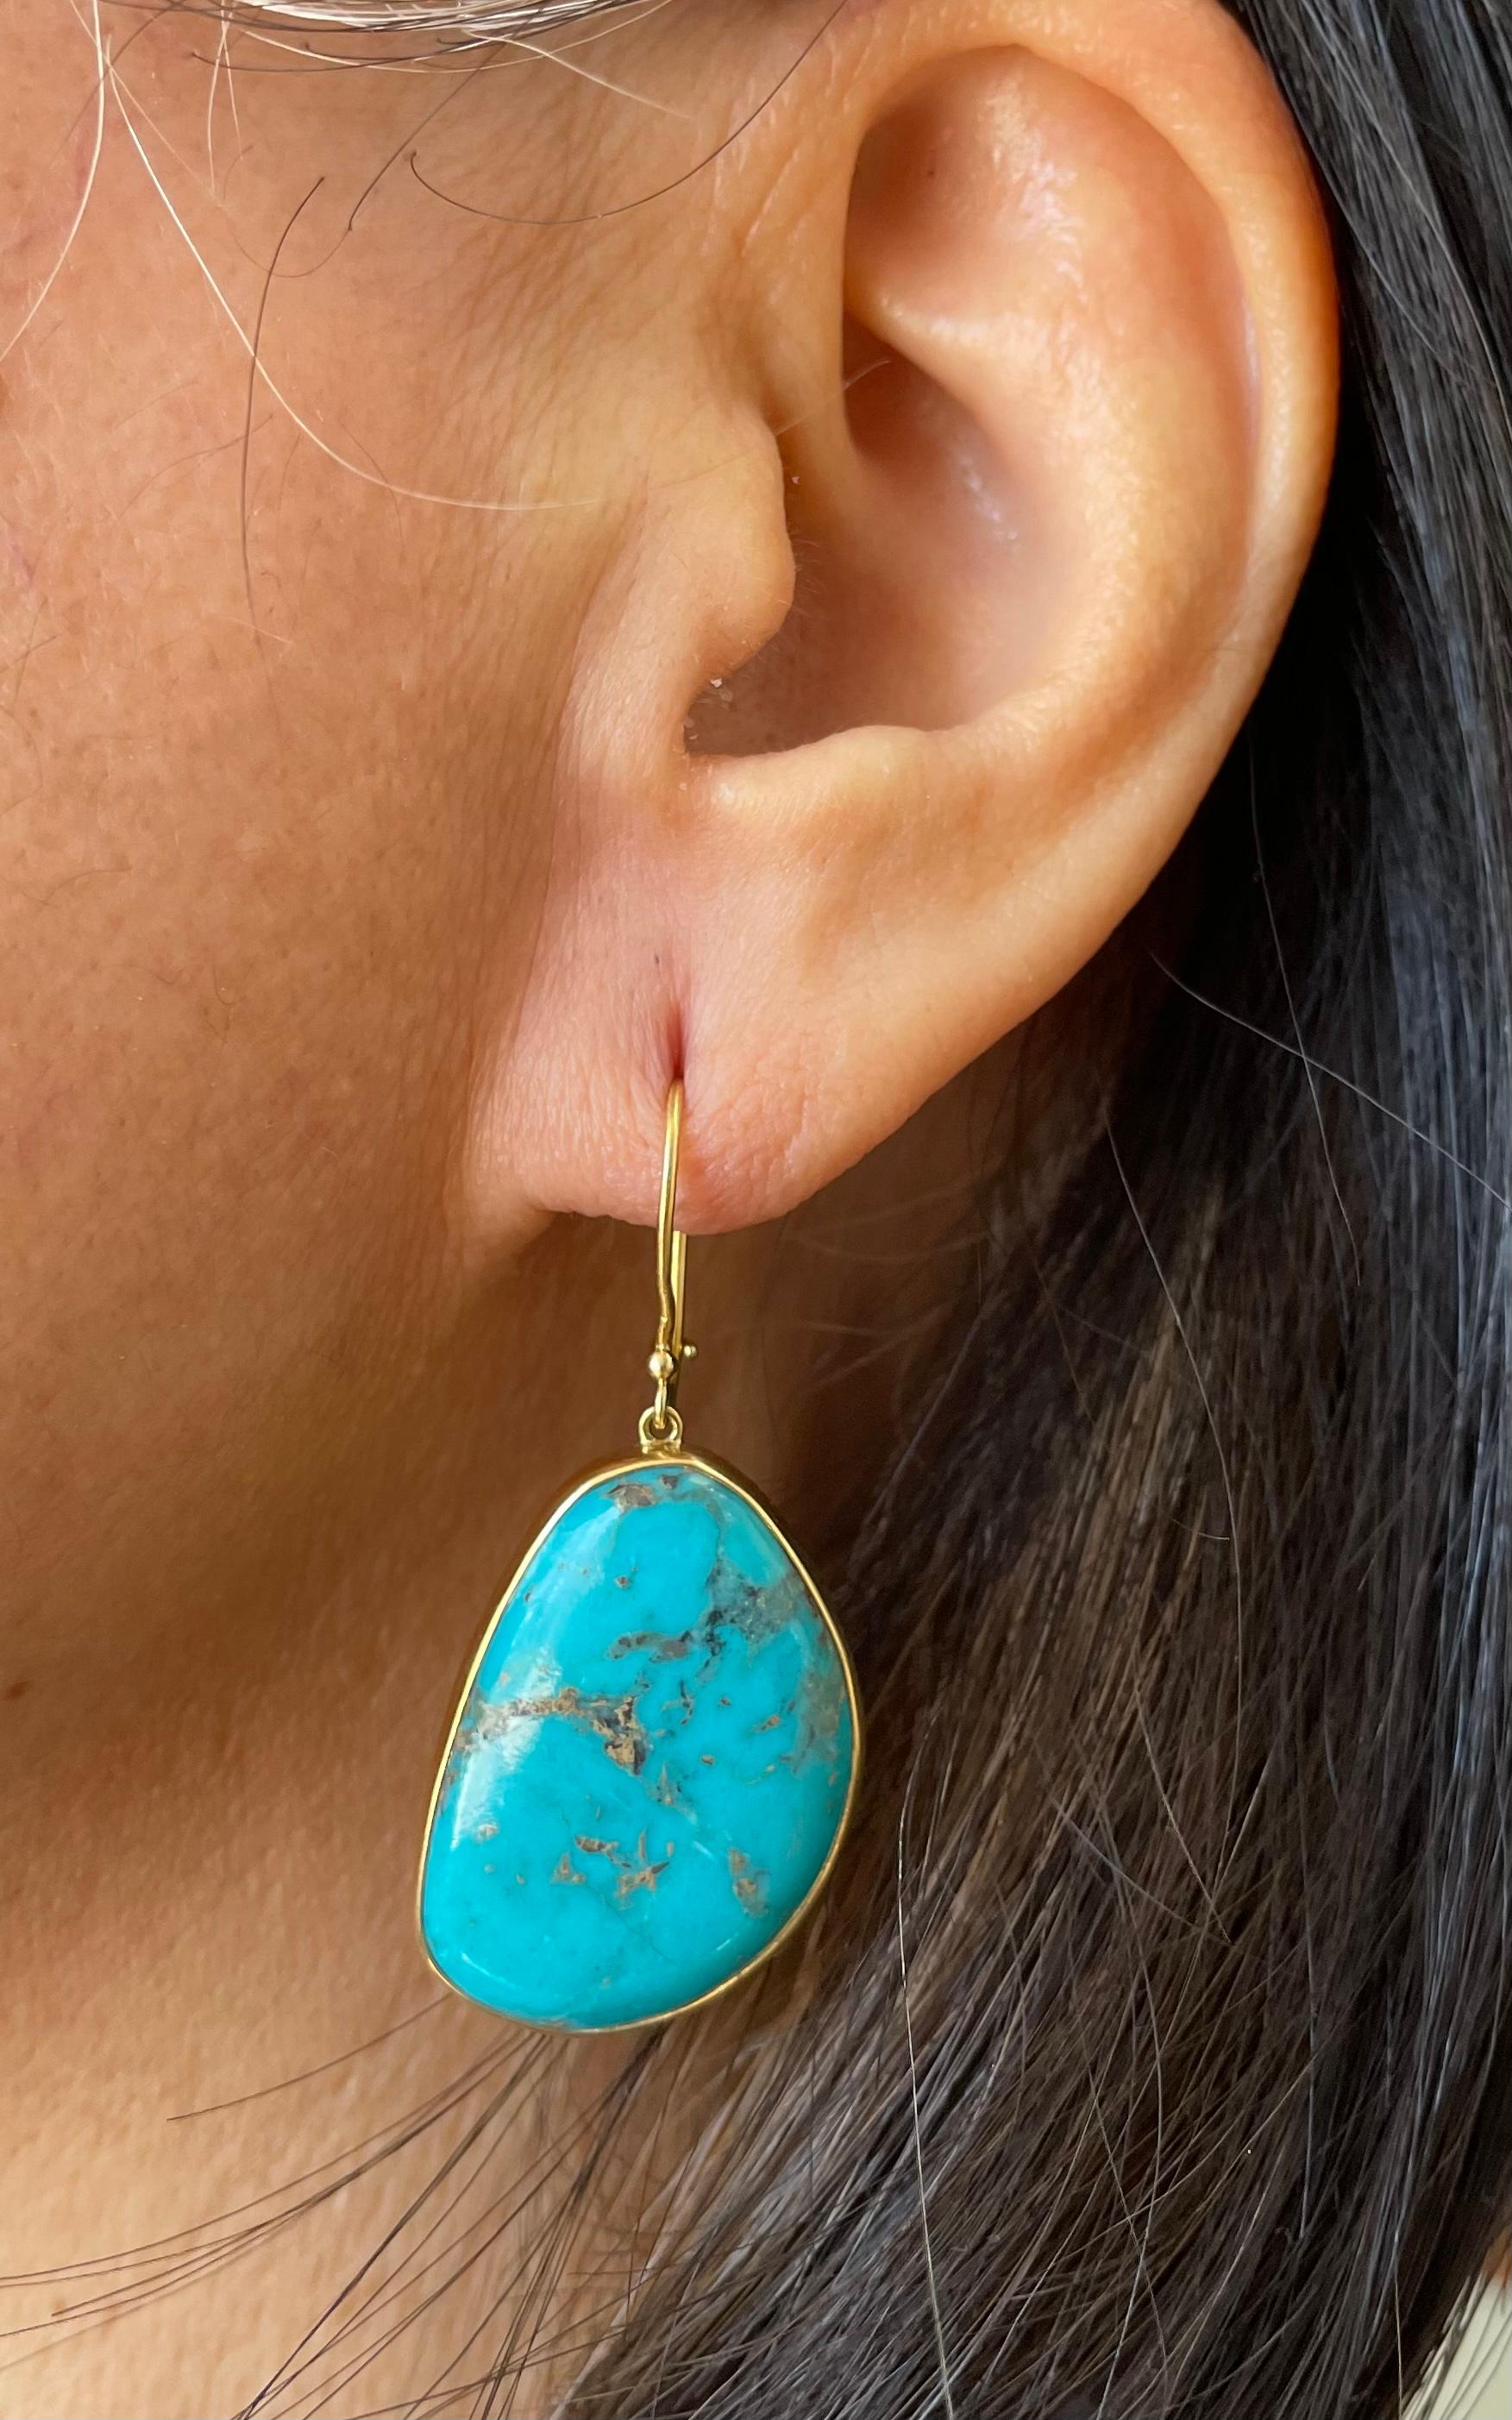 Two large, 19 x 28 mm irregular shaped matched turquoise cabochons are held in simple 18K bezels below safety clasp wires.
A great look for a great price!  Kingman turquoise from Arizona.